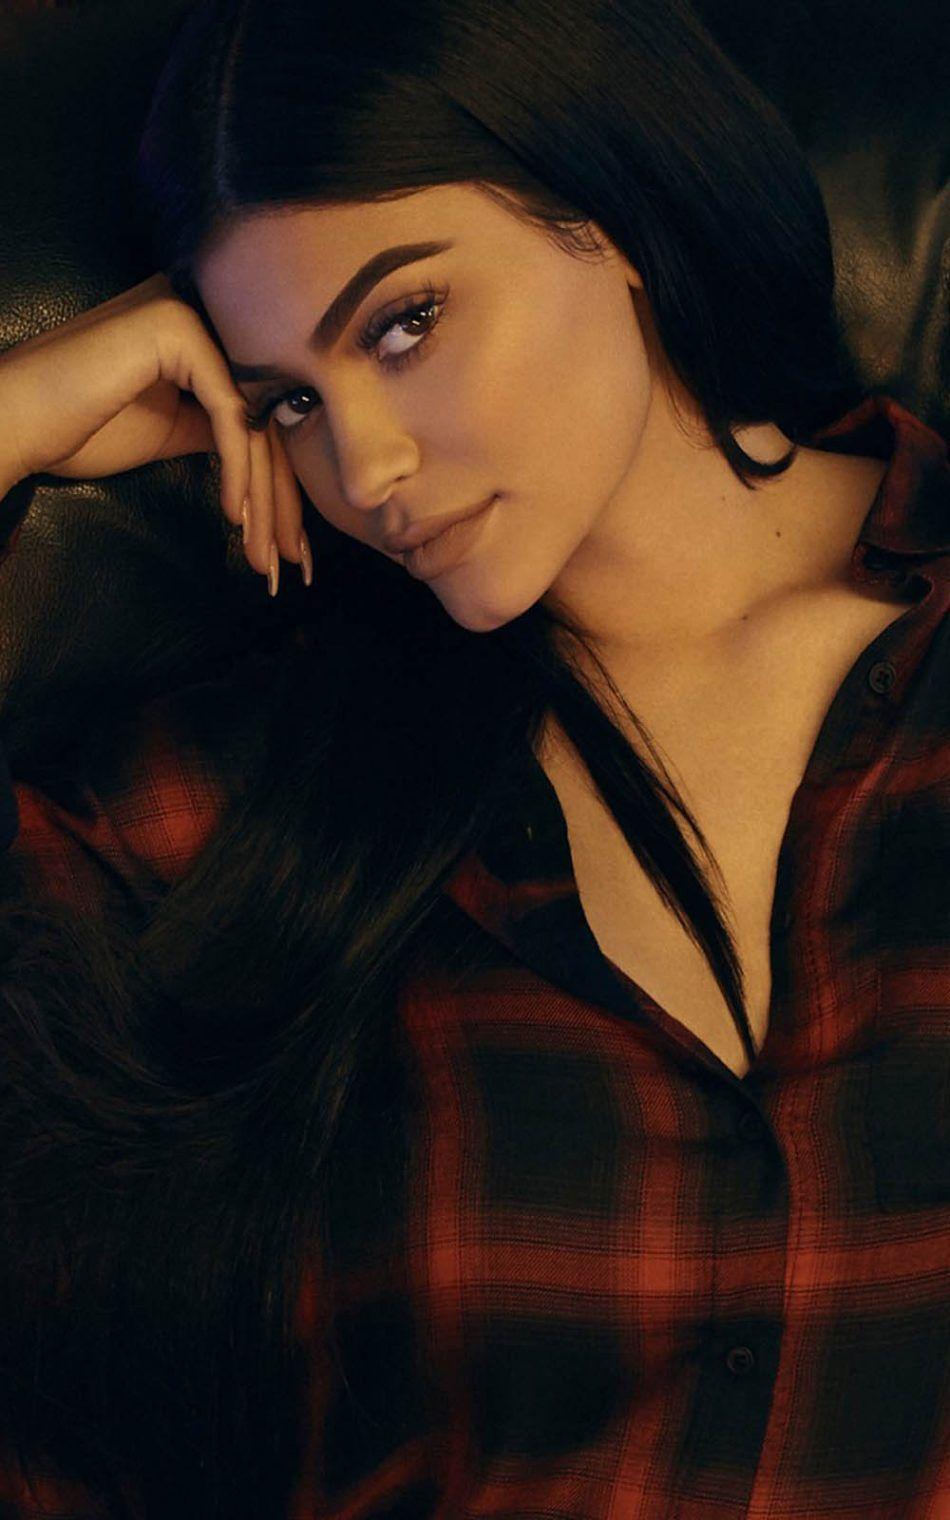 Kylie Jenner 2018 Free 100% Pure HD Quality Mobile